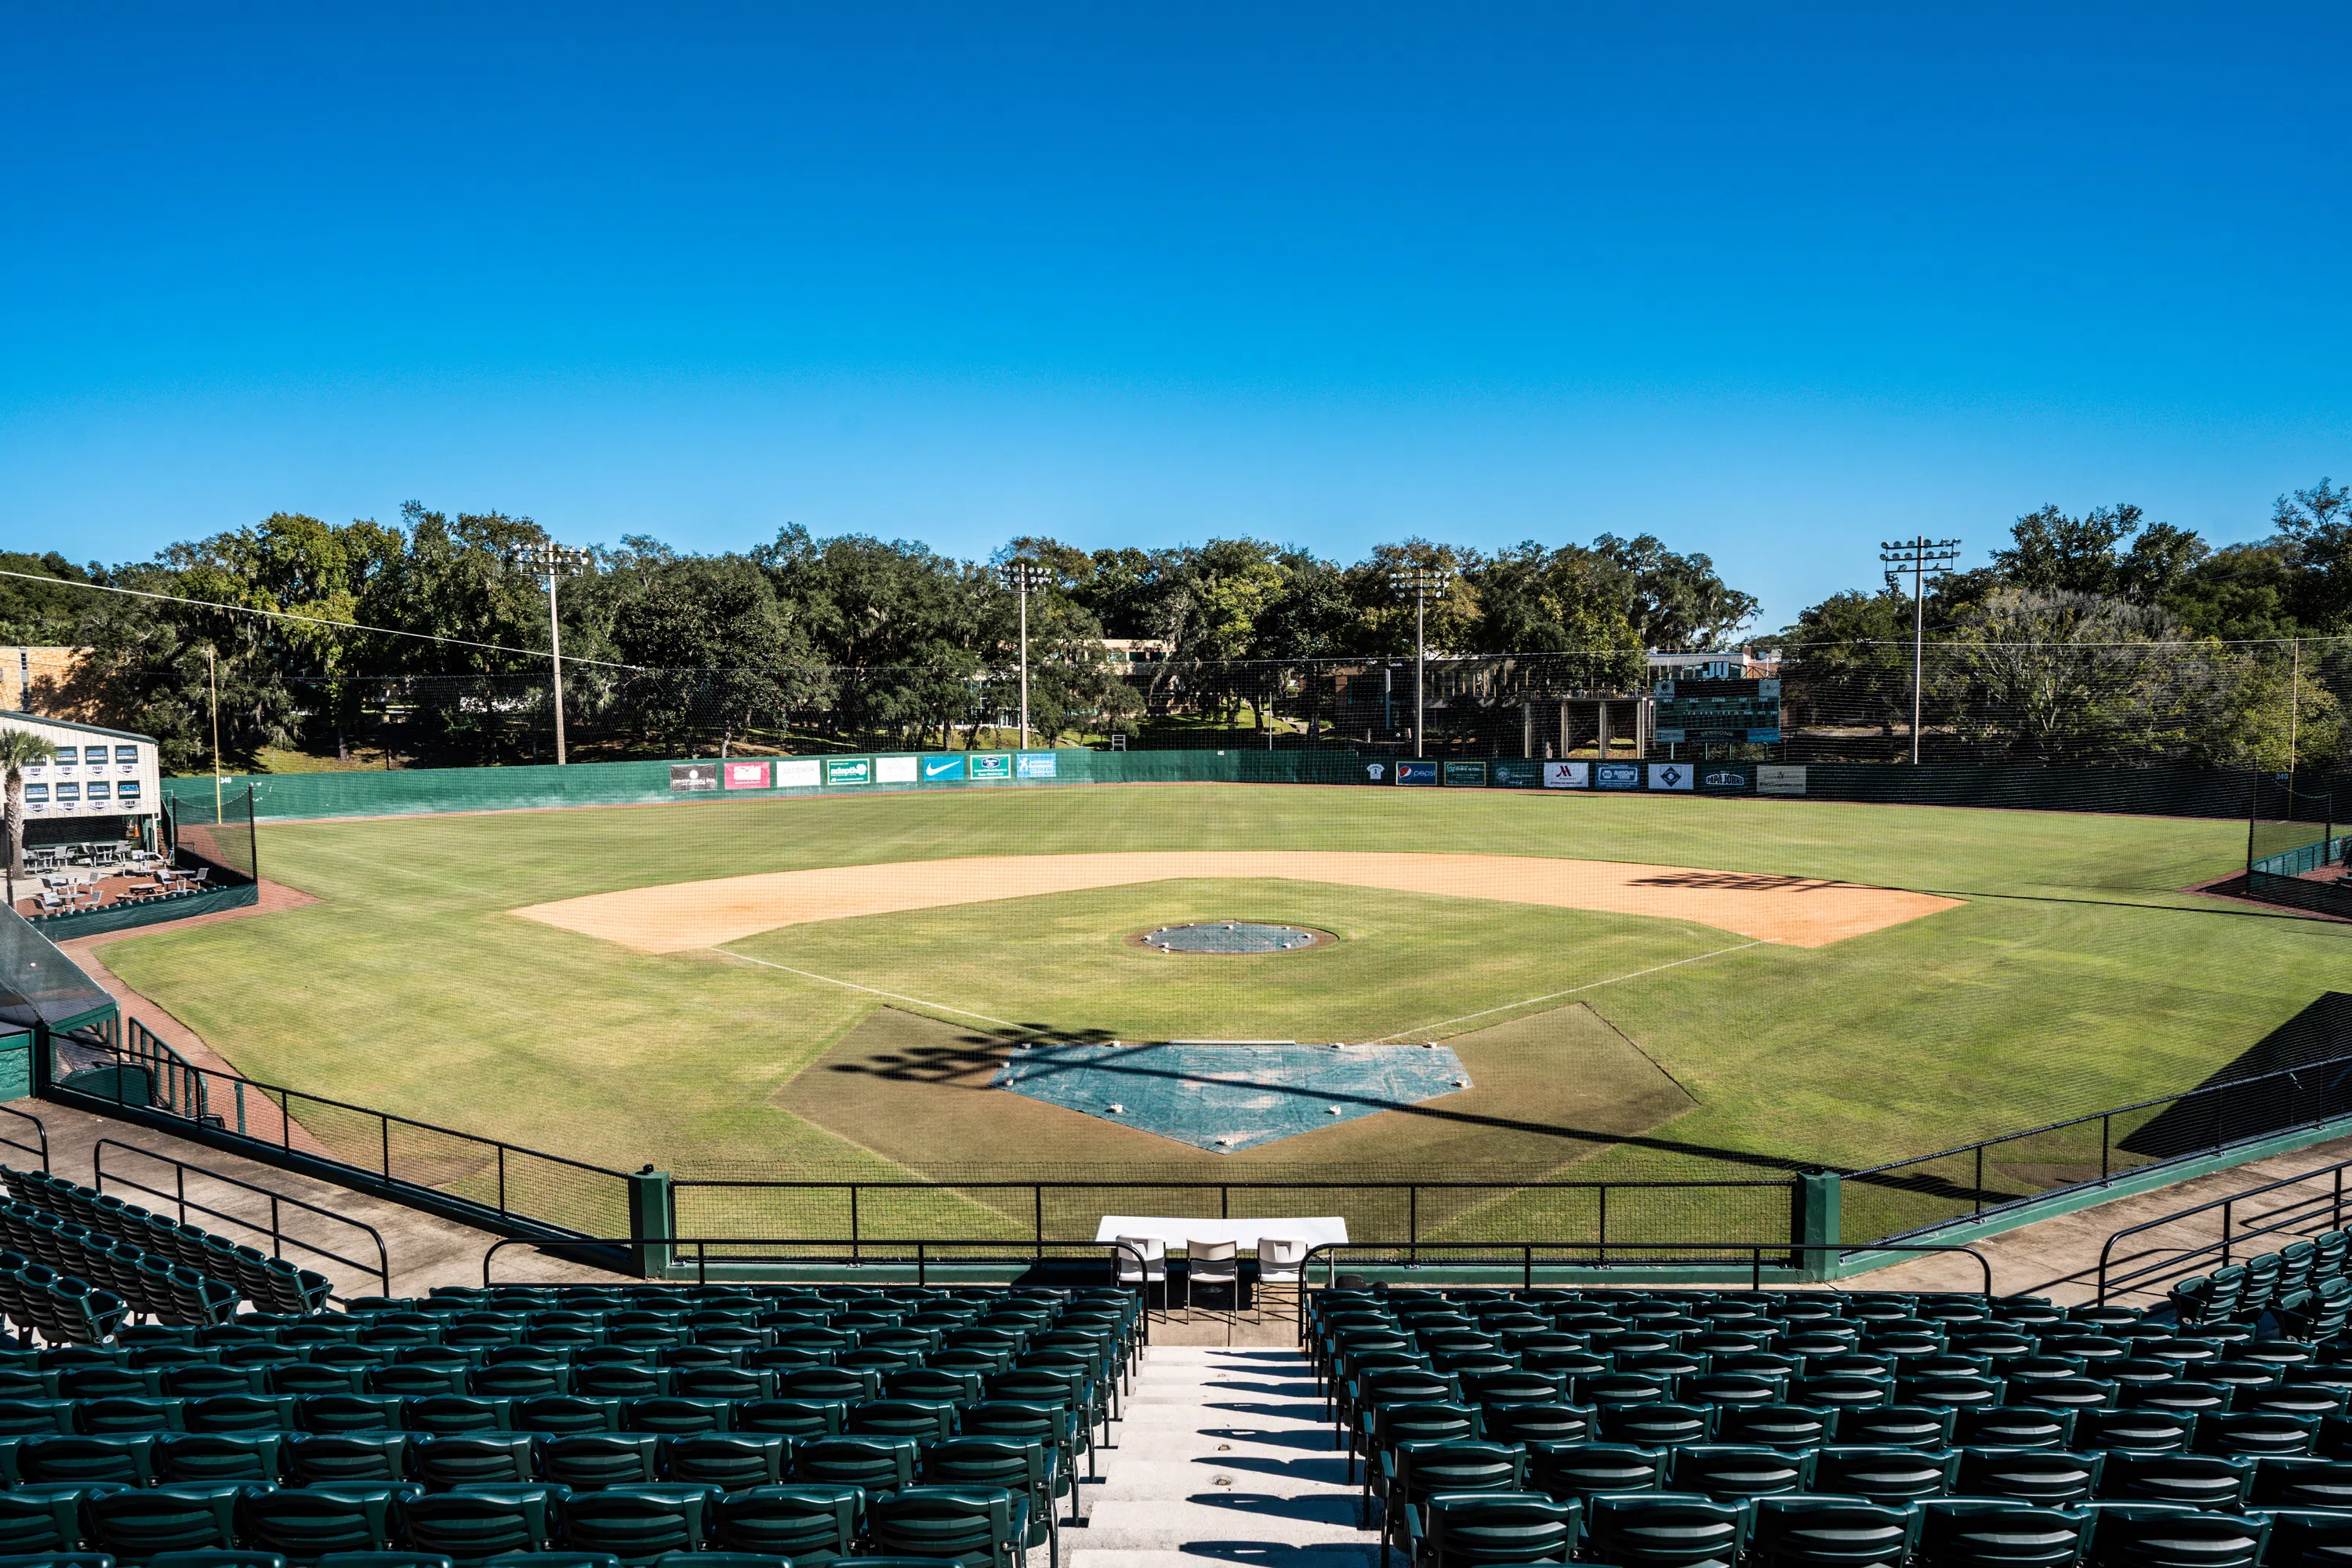 This is the view of the Dolphins baseball field. 